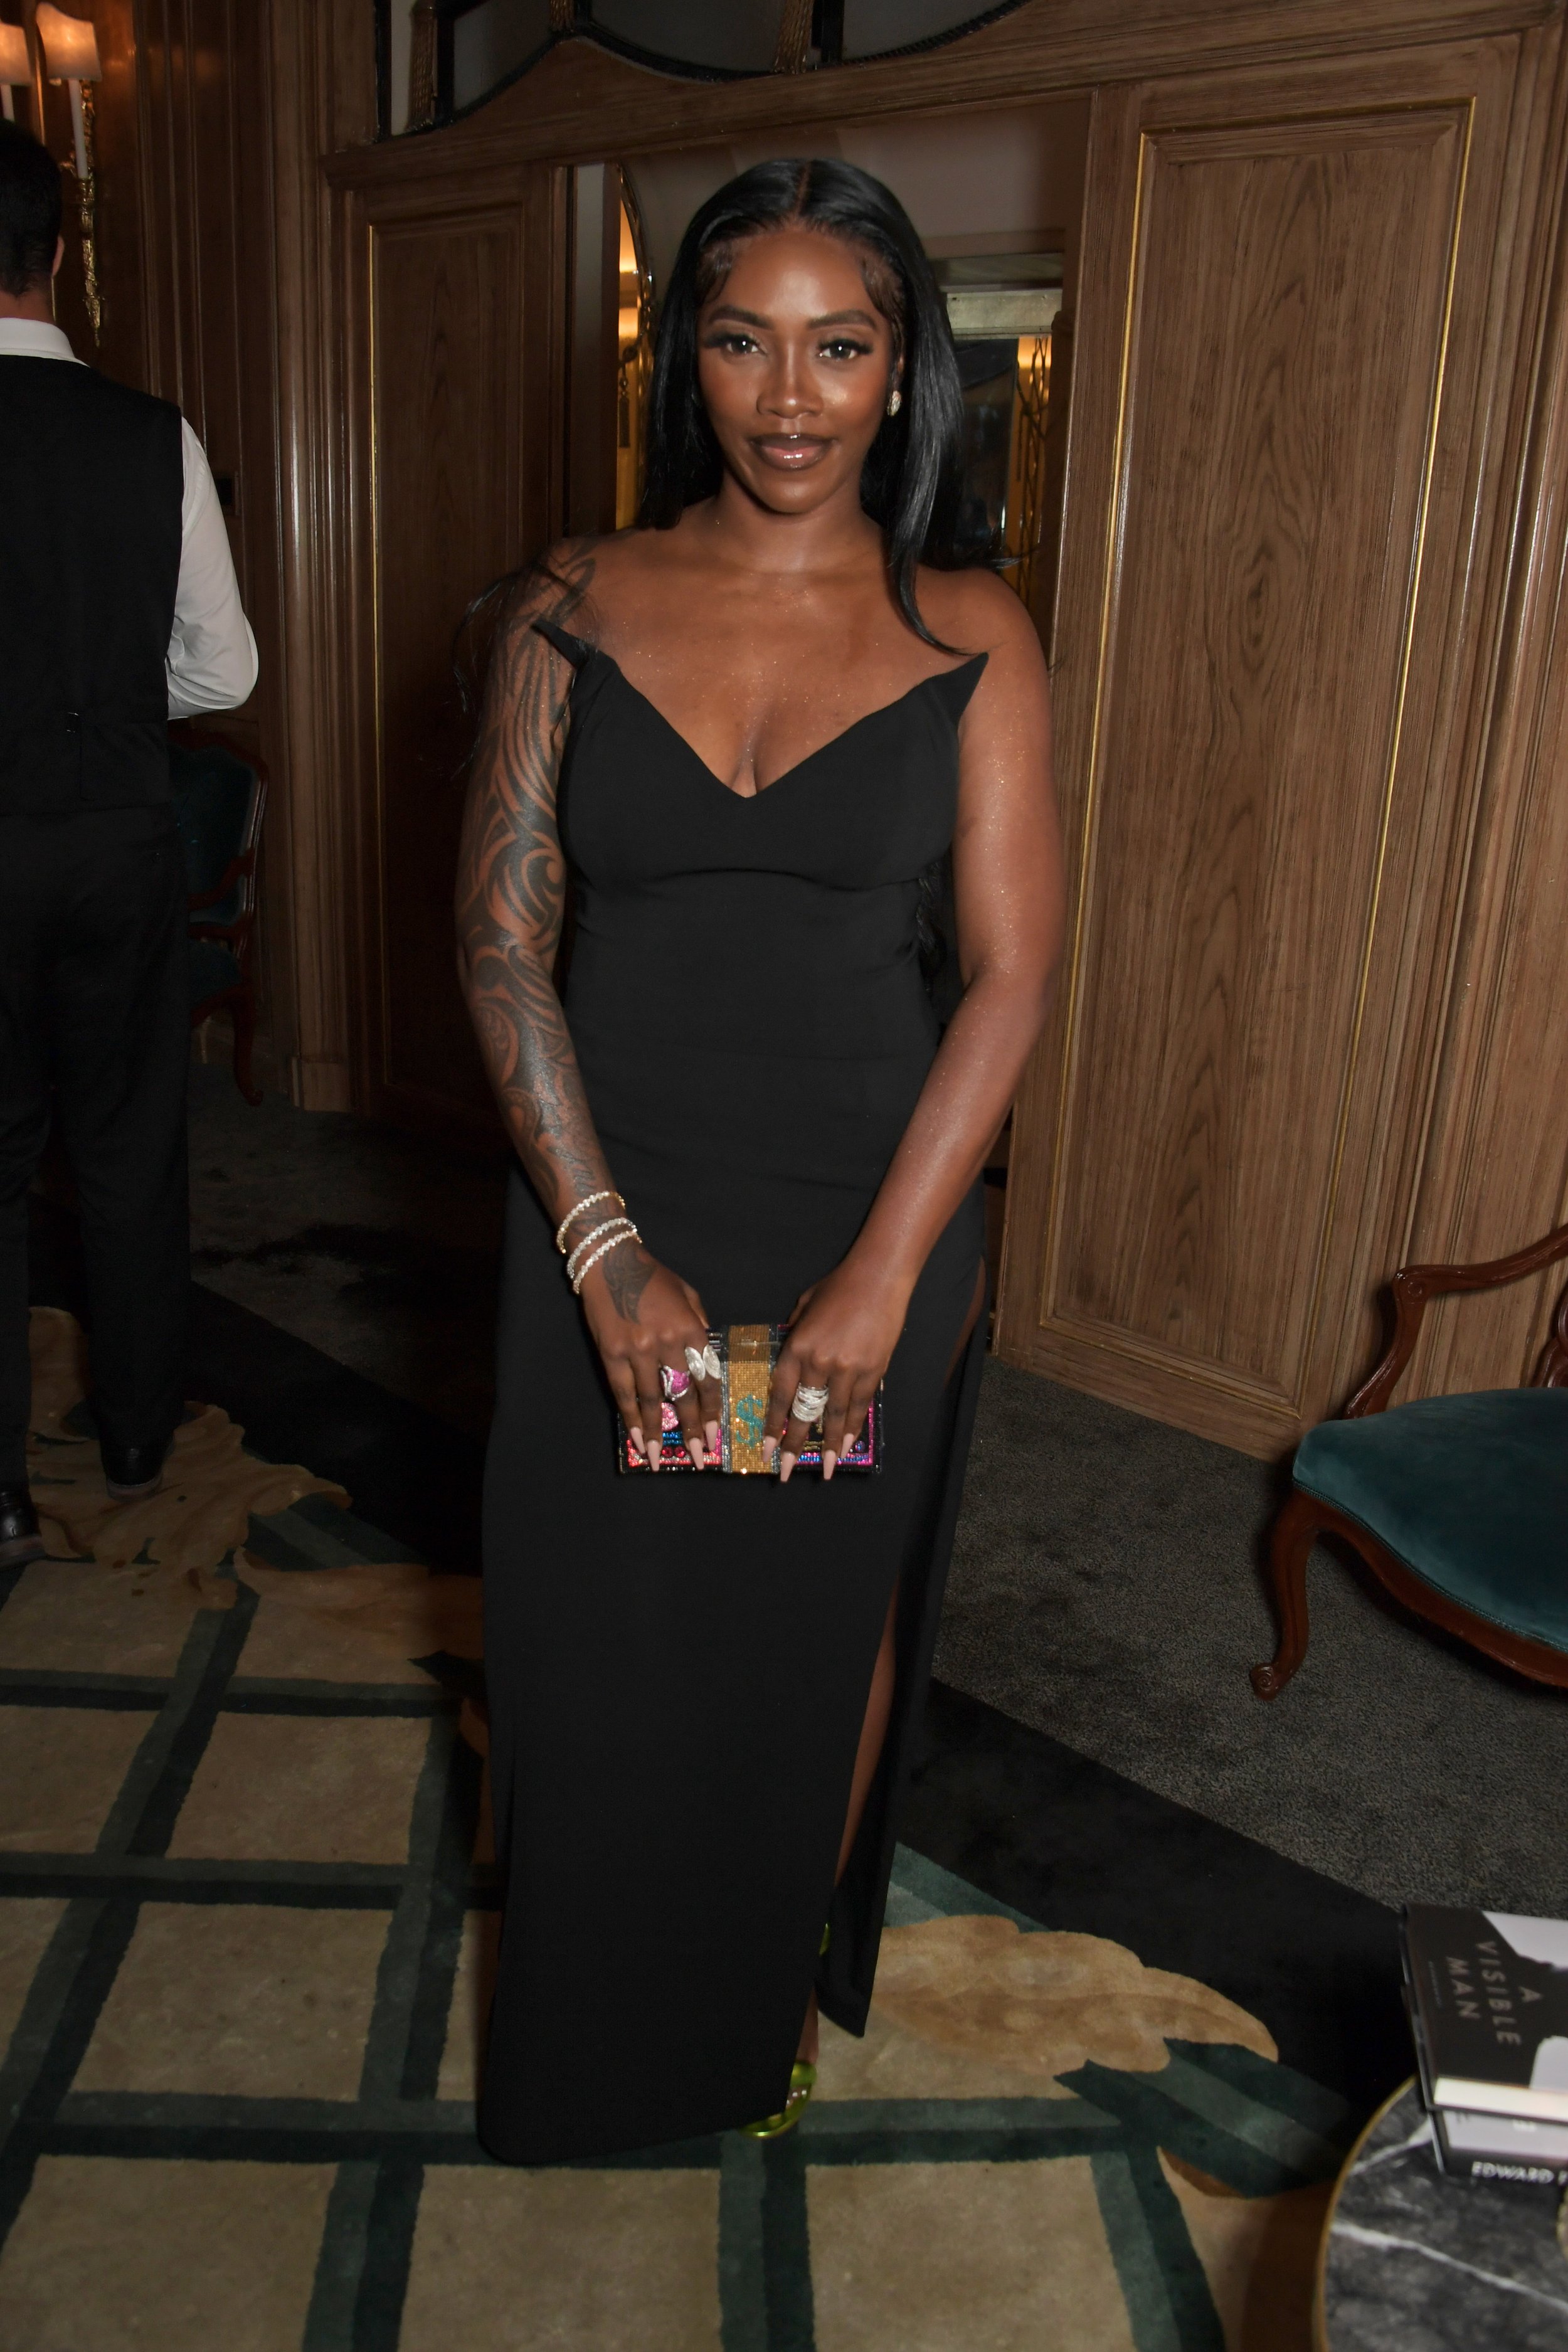  LONDON, ENGLAND - SEPTEMBER 04: Tiwa Savage attends a celebration of Edward Enninful's new memoir "A Visible Man" at Claridge's Hotel on September 4, 2022 in London, England. (Photo by David M. Benett/Dave Benett/Getty Images) 